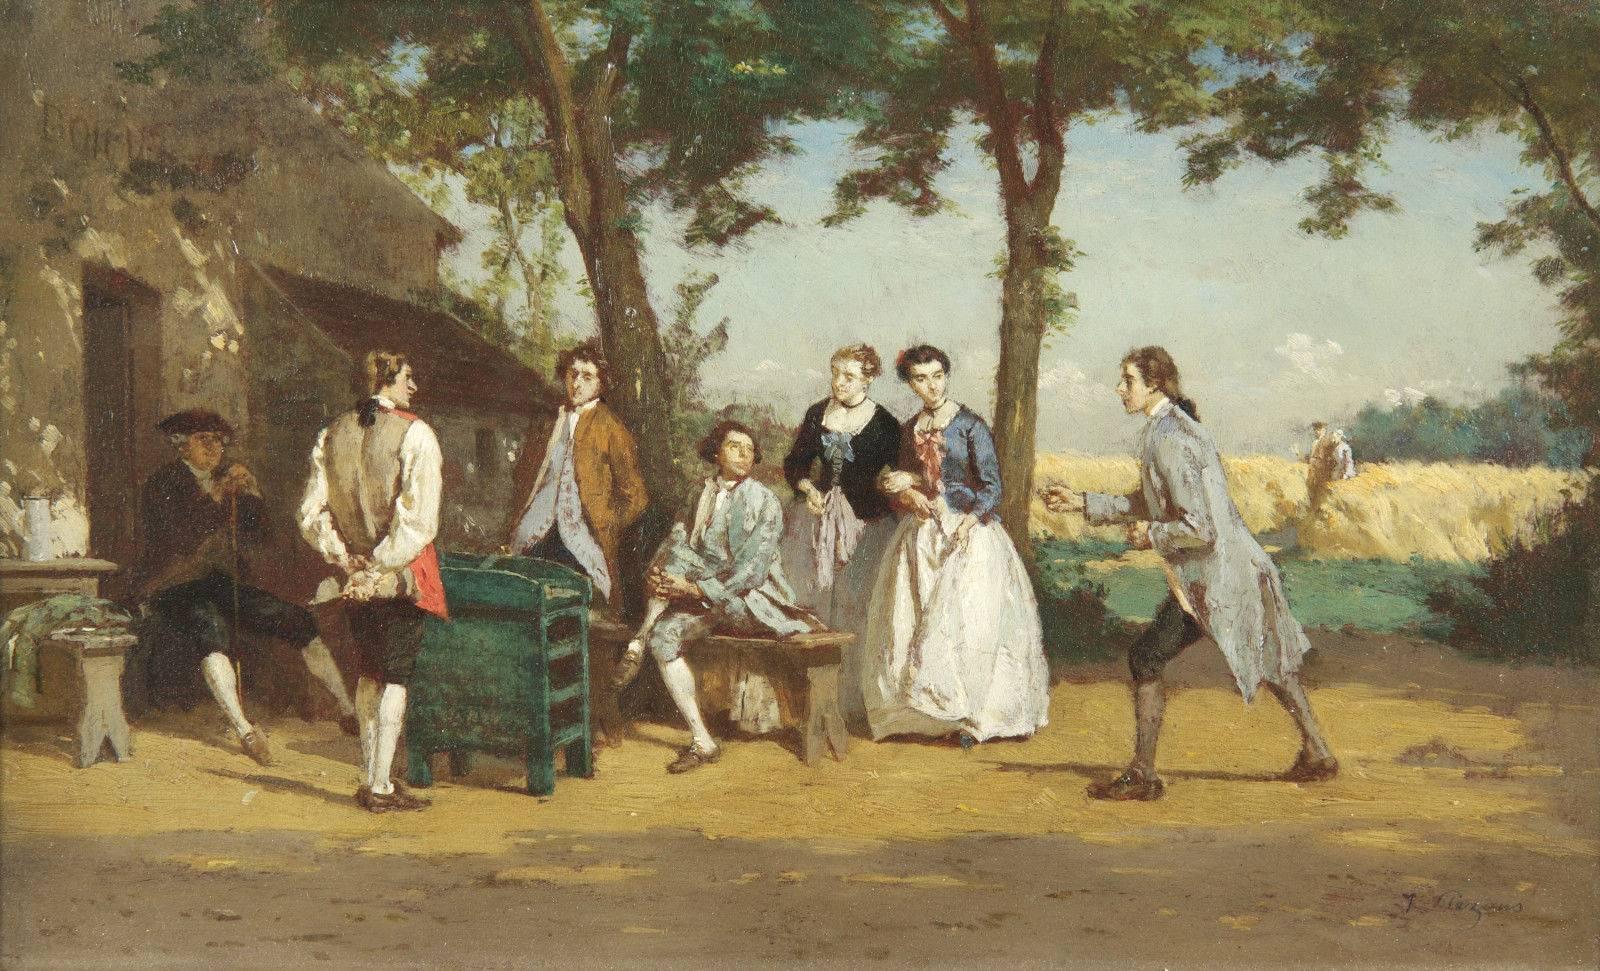 This is a vivid and charming little scene capturing a group of friends enjoying a sunny summer afternoon of games at a rural tavern in the middle of wheat fields. The tavern has a faint block inscription reading "Bon Vin" or "Good